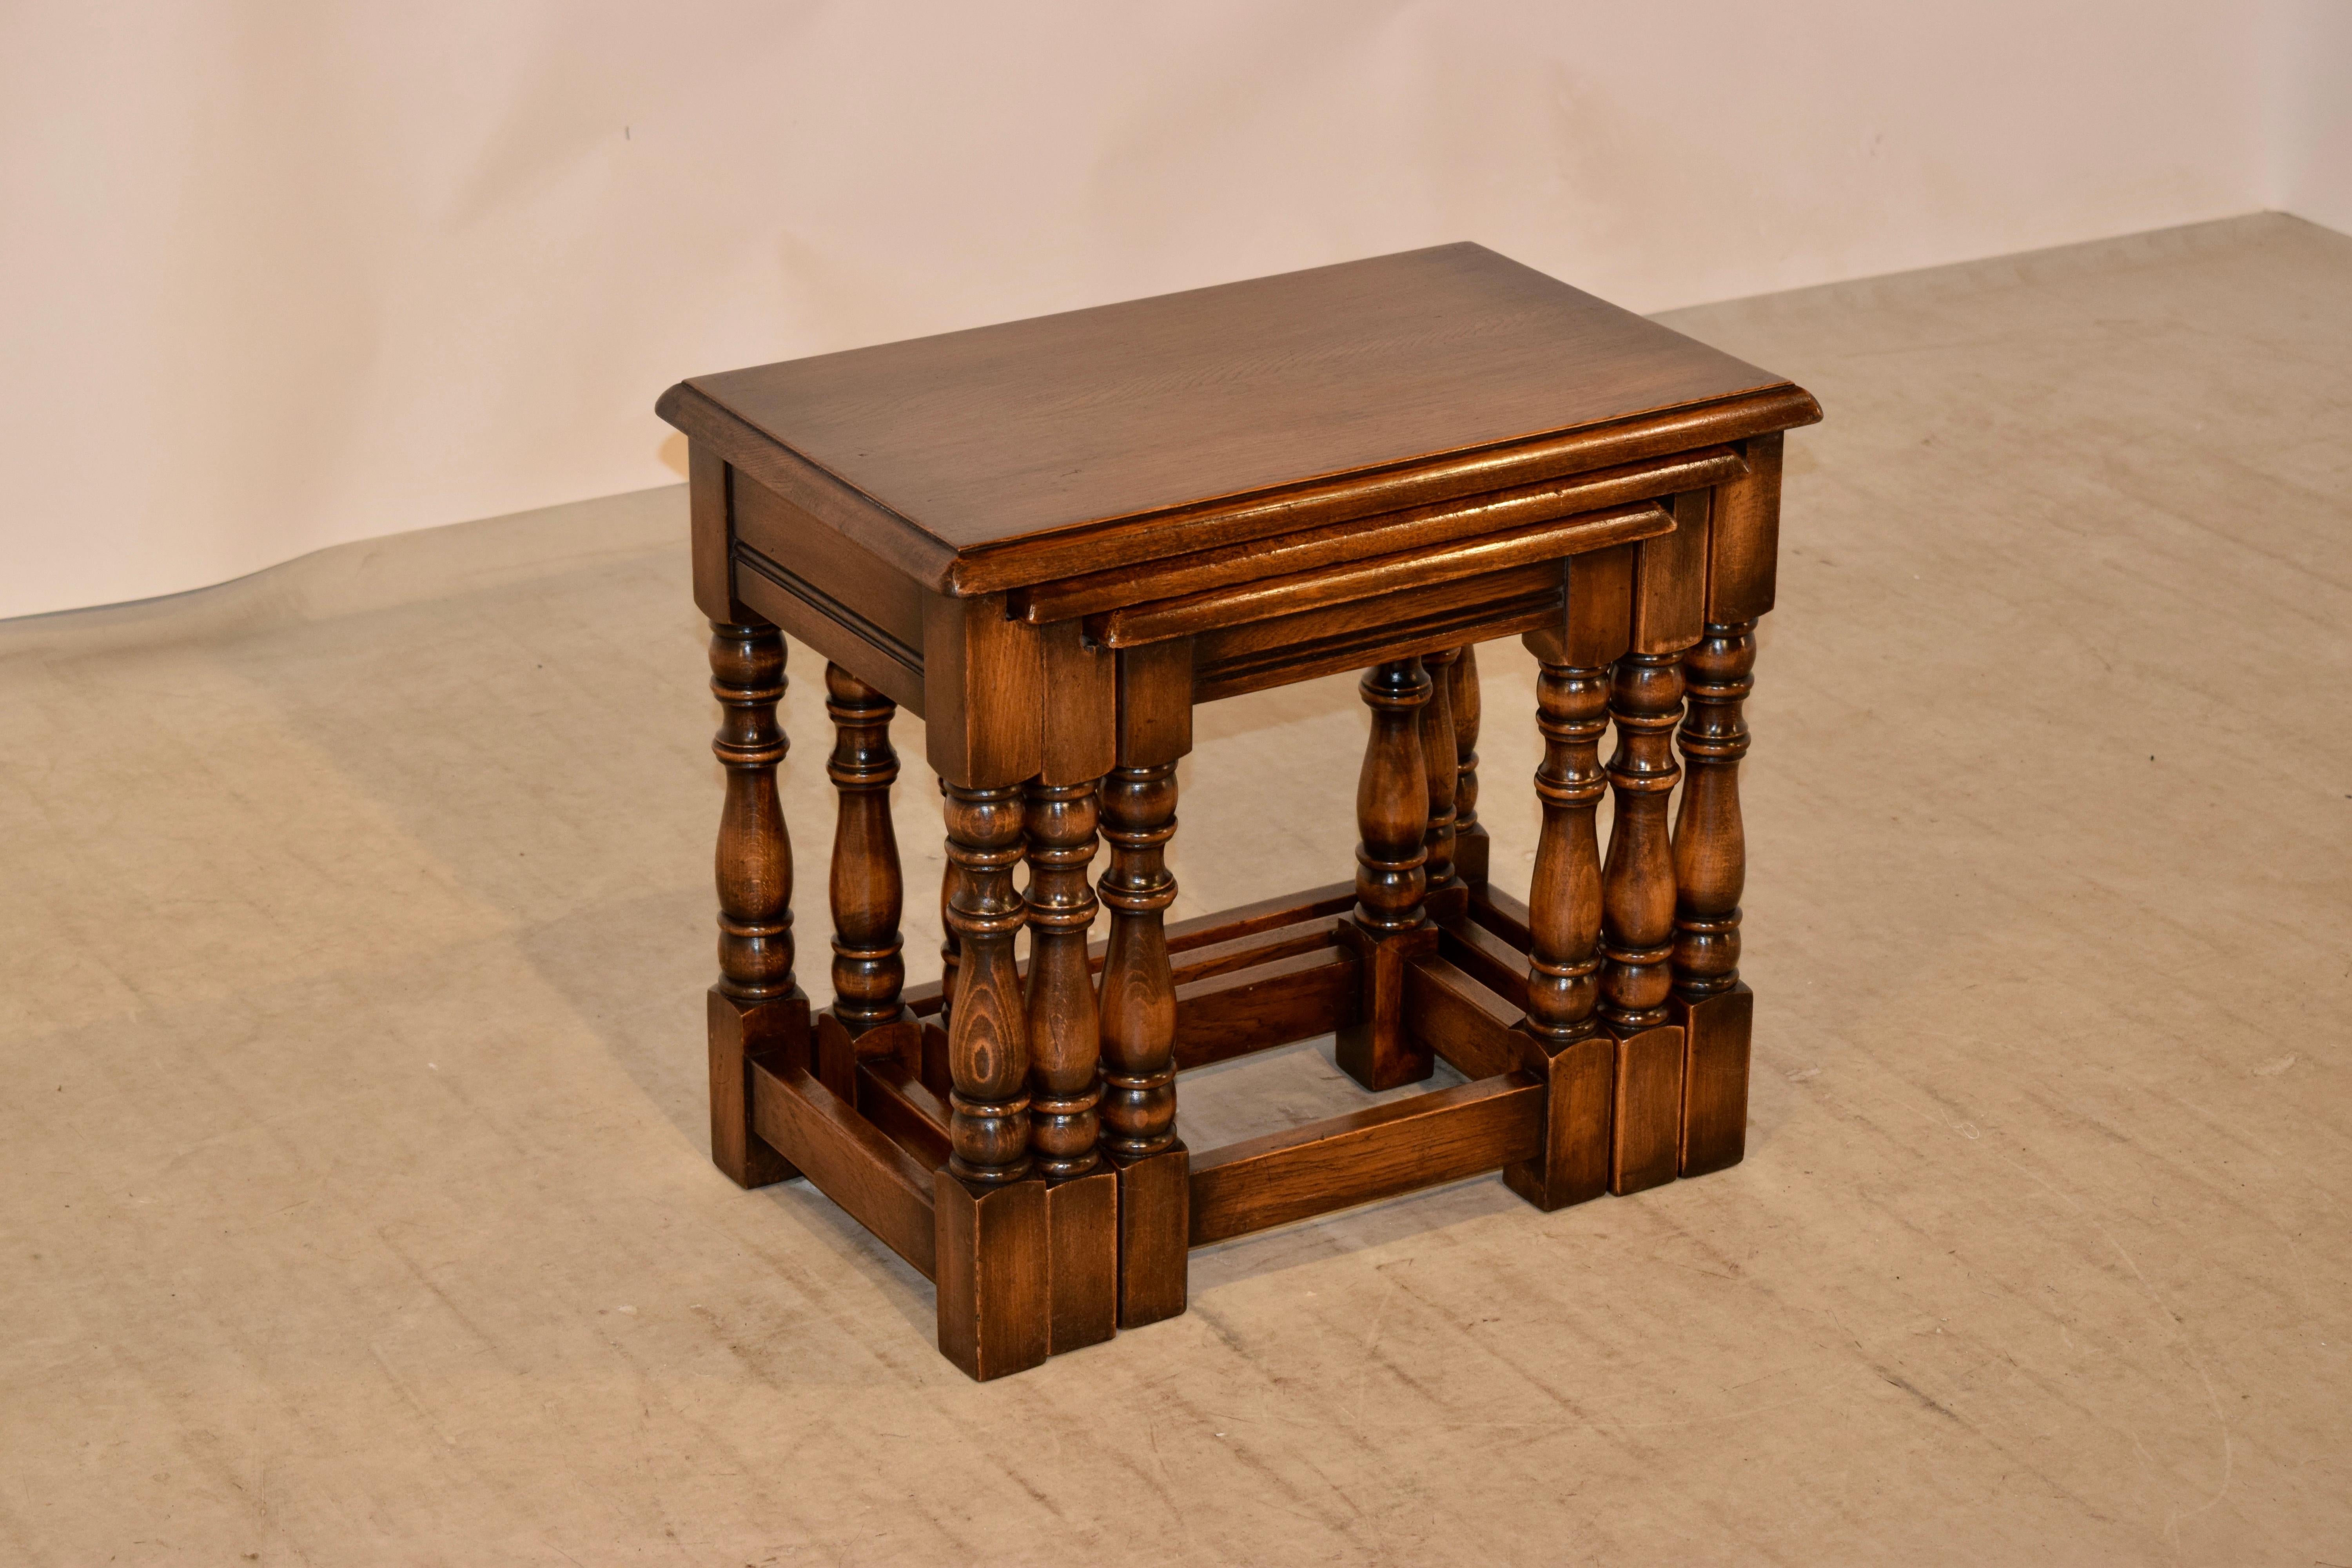 Set of three English oak nested tables with bevelled edges around the tops, following down to simple aprons, and supported on nicely hand-turned legs joined by simple stretchers, circa 1900. Small table measures 14.13 x 10.13 x 17, and the medium